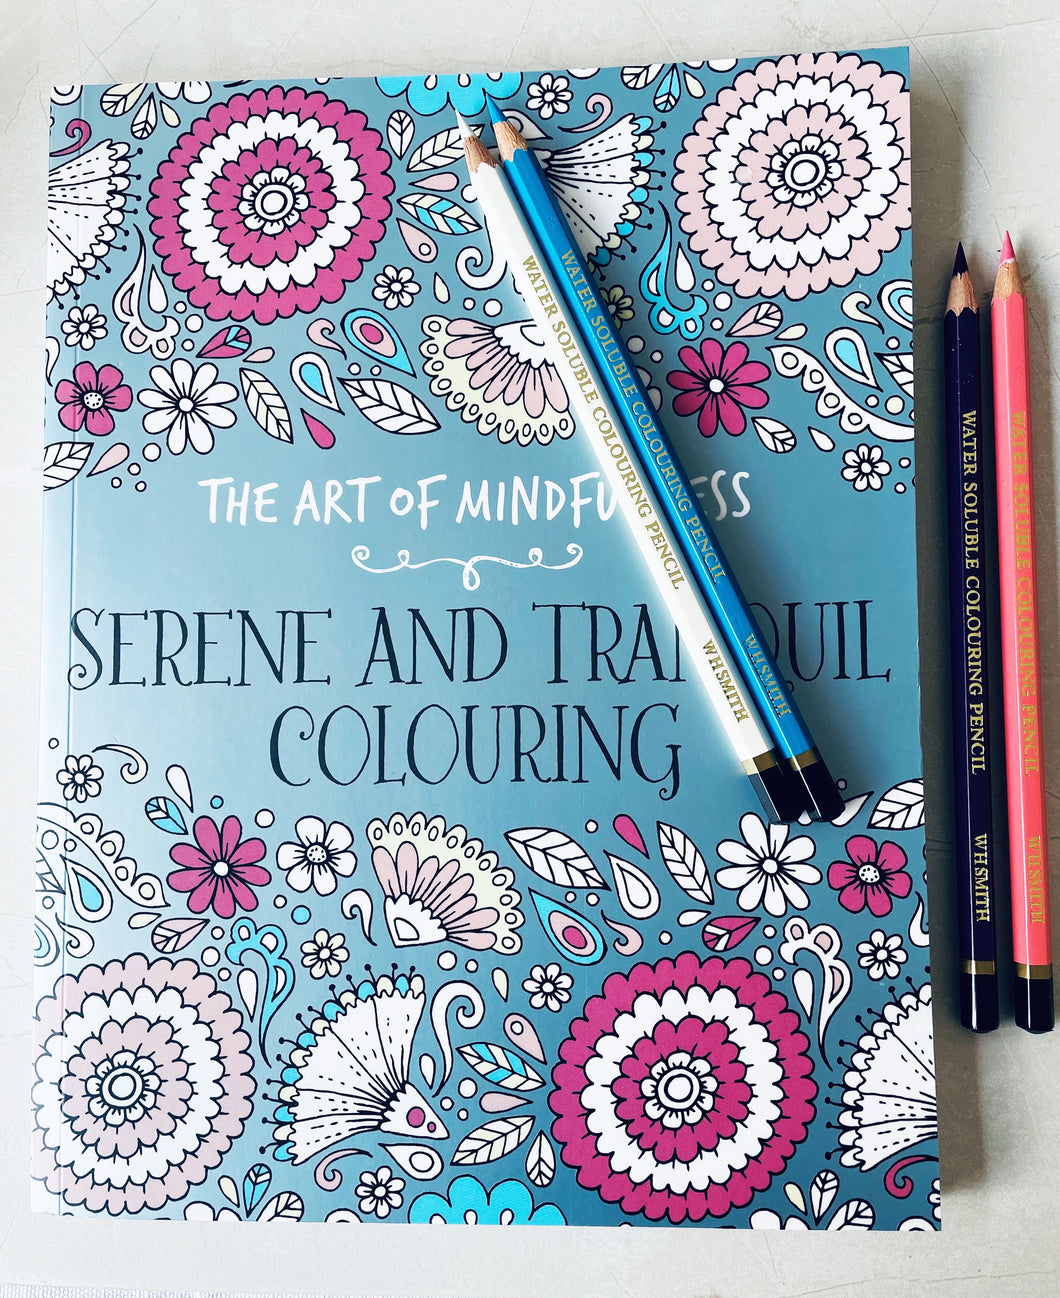 The art of mindful colouring